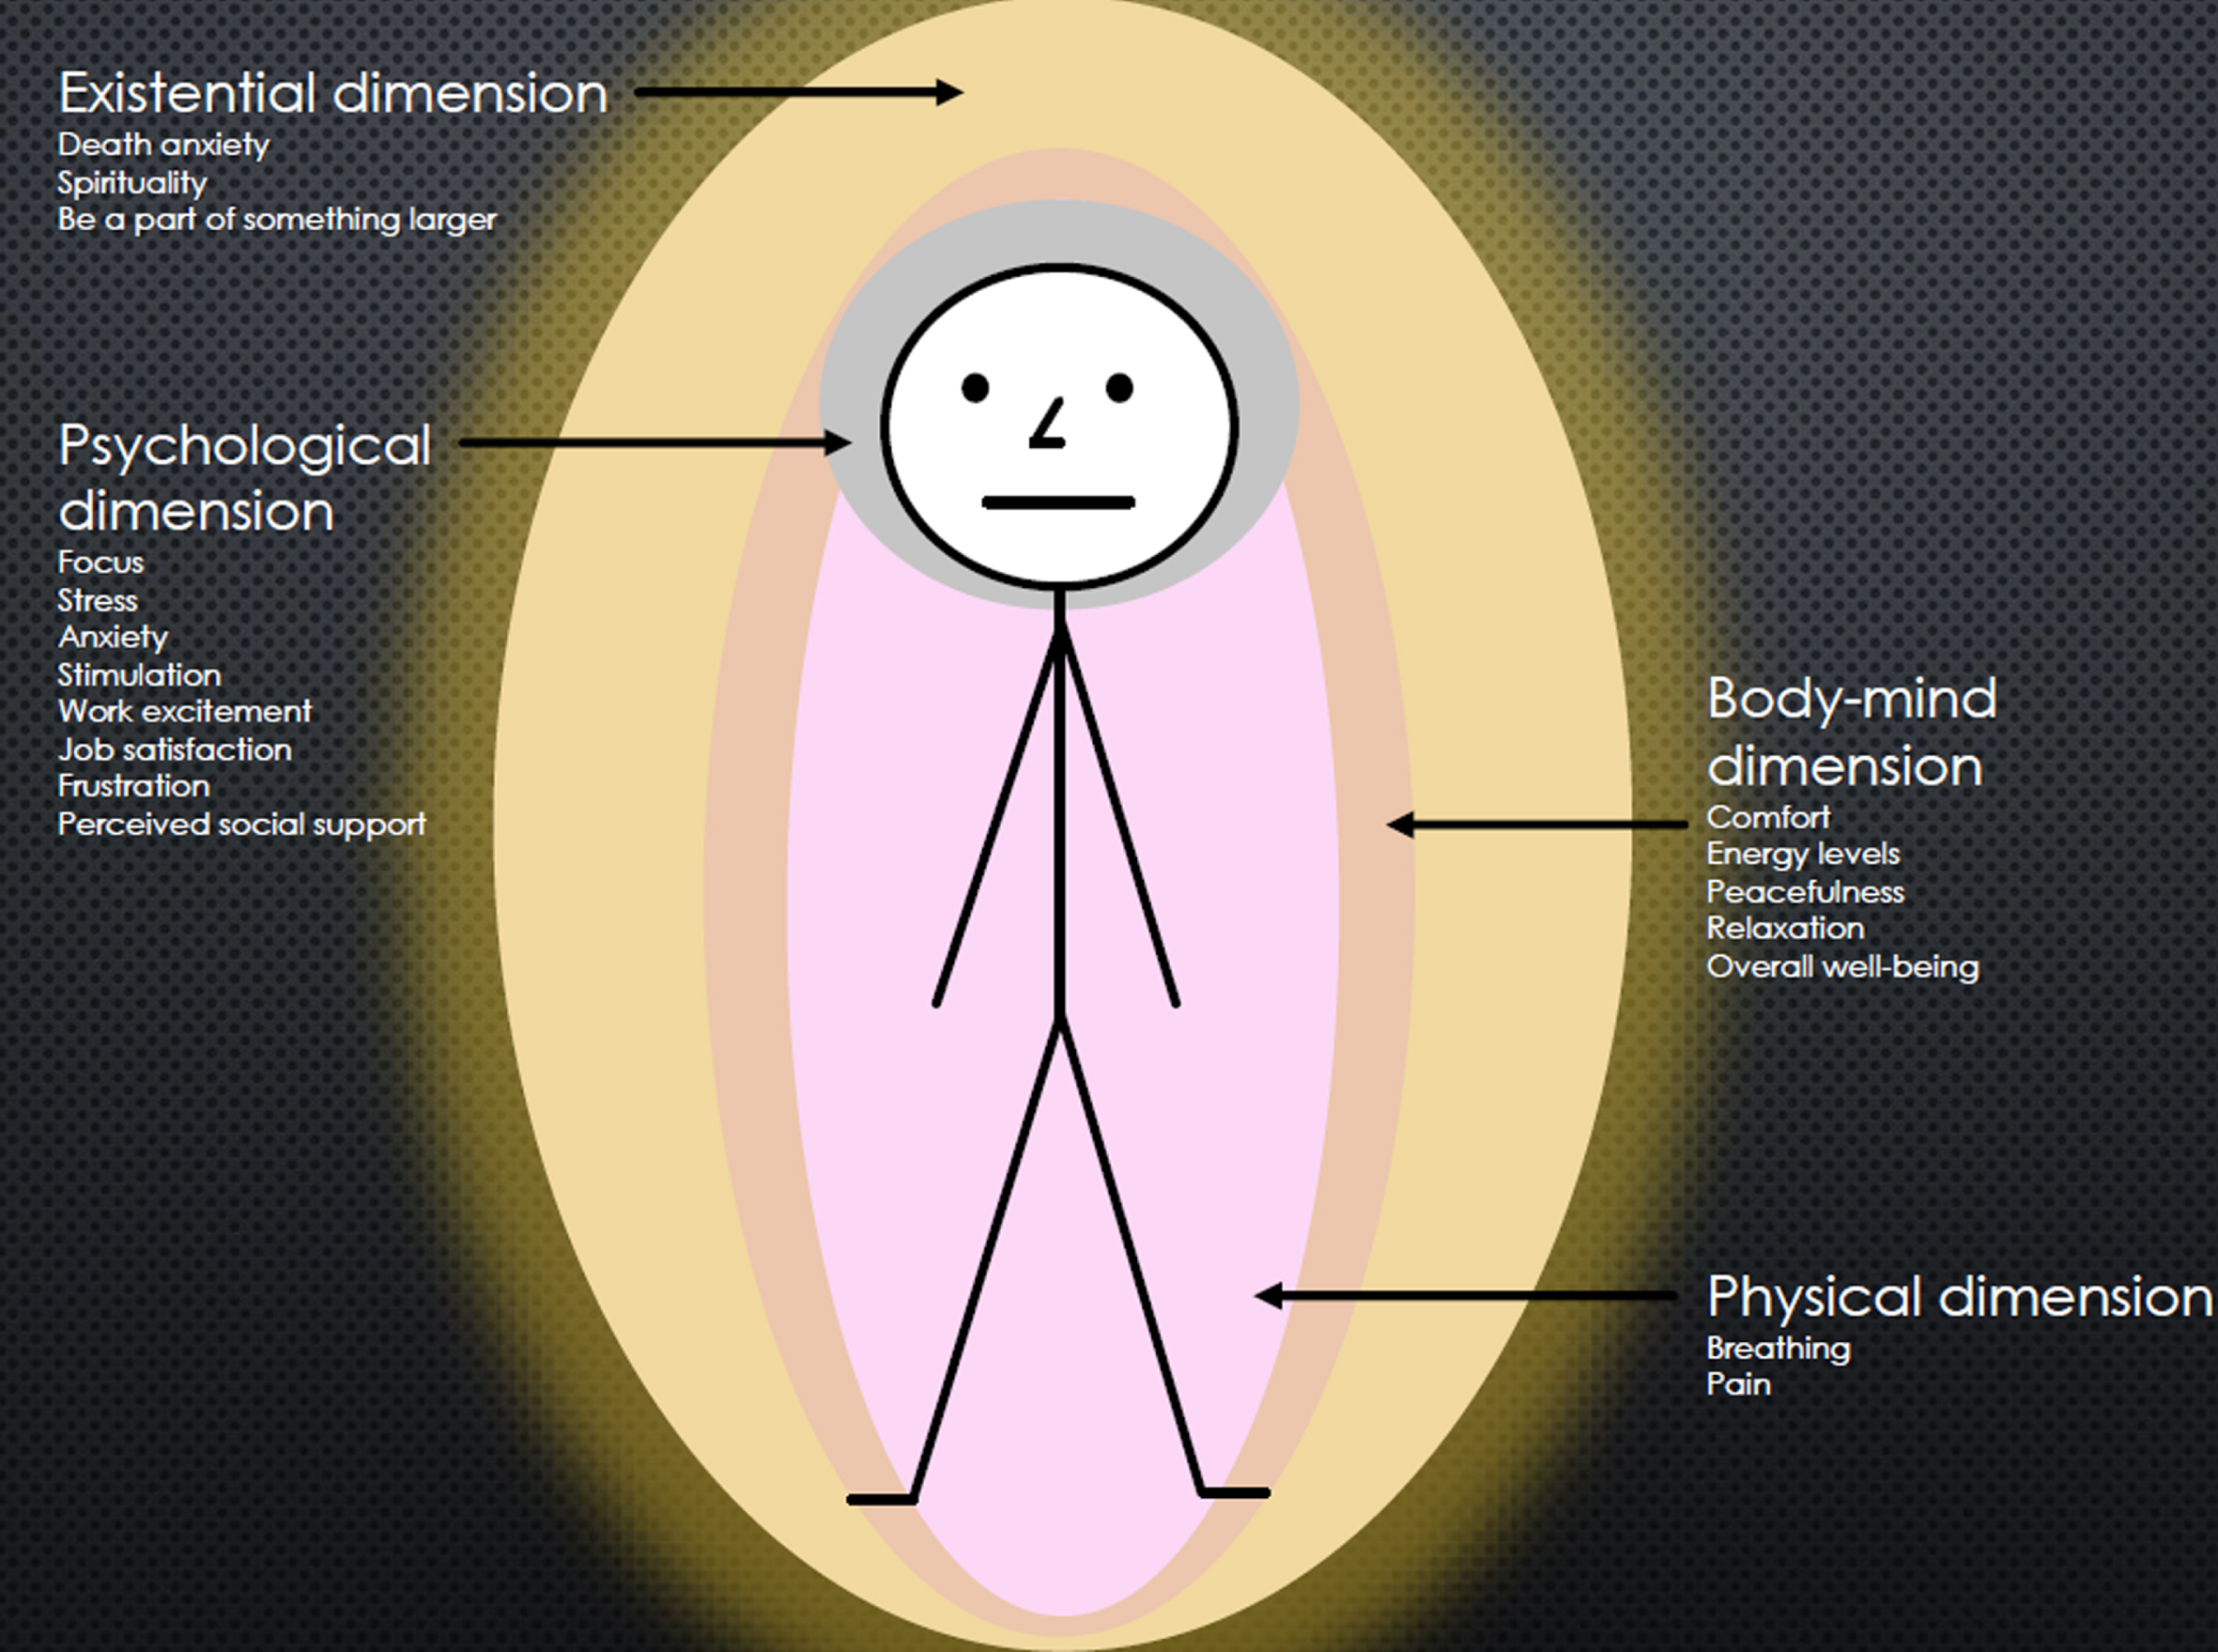 Dimensions of well-being in relation to the worker.